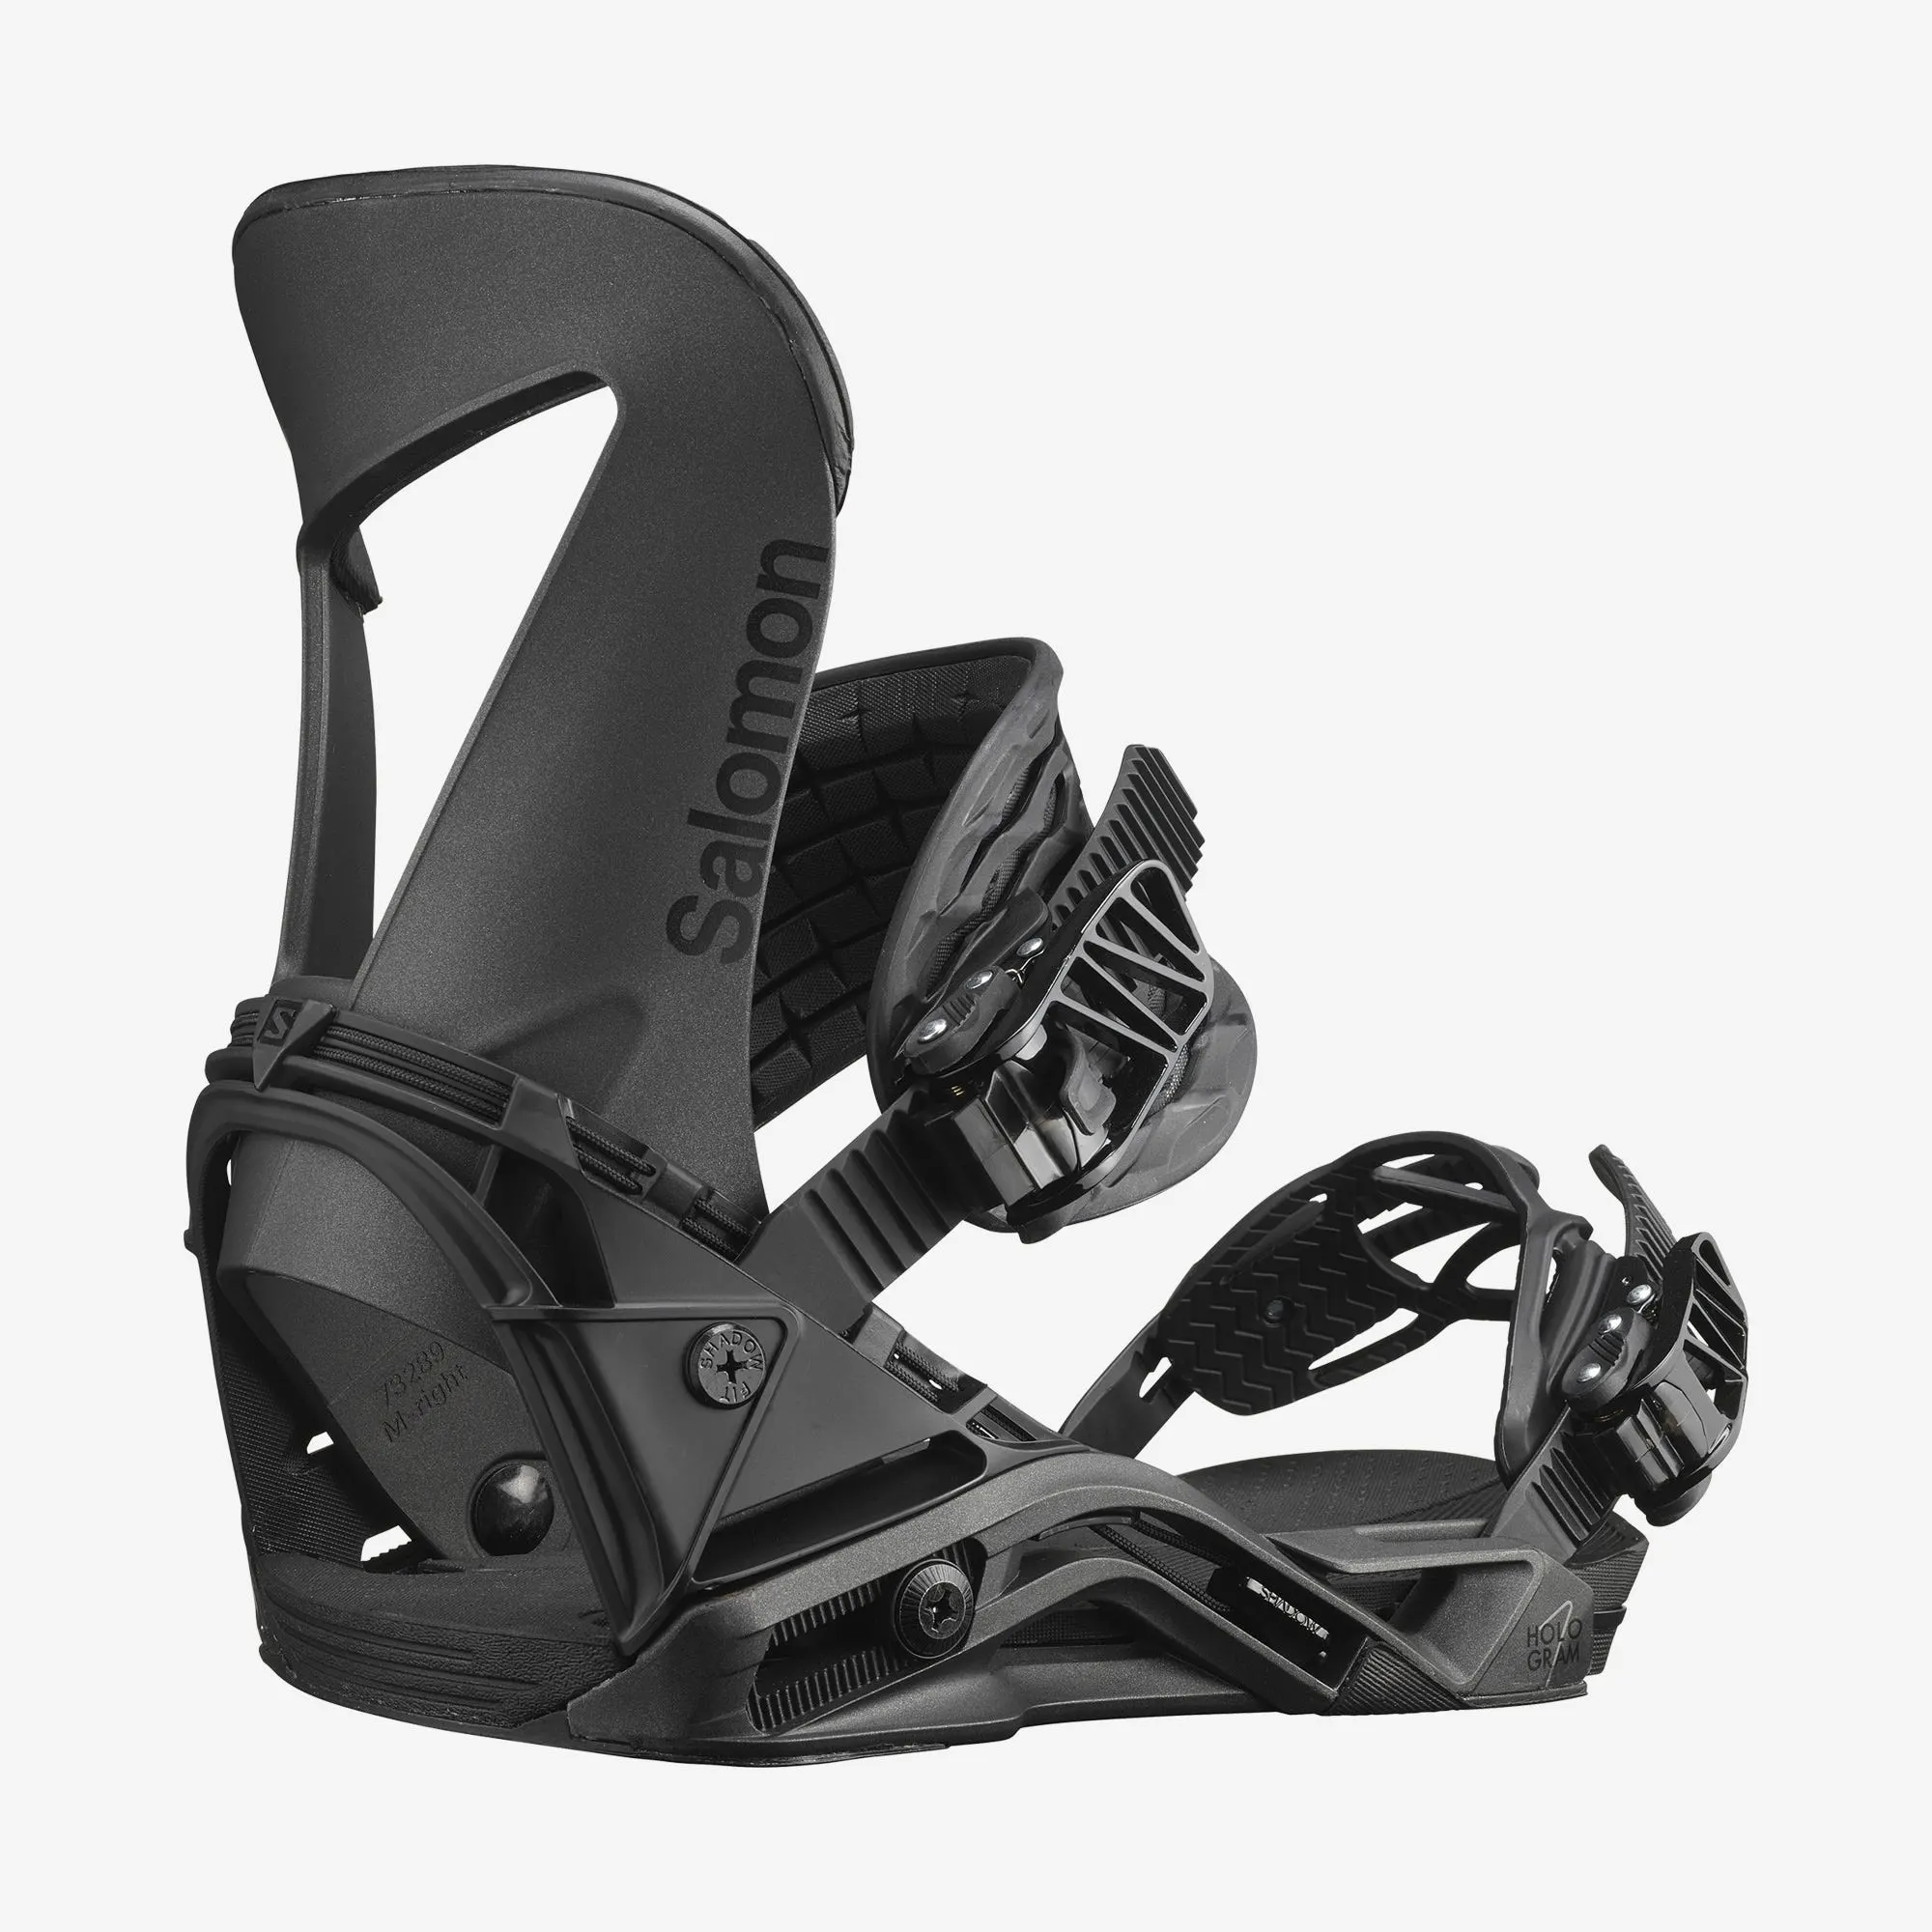 The Hologram binding features a freestyle focused, asymmetric design with unmatched comfort using our latest technology. Shadowfit breaks the barrier of a conventional heelcup, allowing for consistent flex and natural connection. Strategically placed Optivibe absorbs shock and provides a reactive area underfoot for all-day comfort and performance.